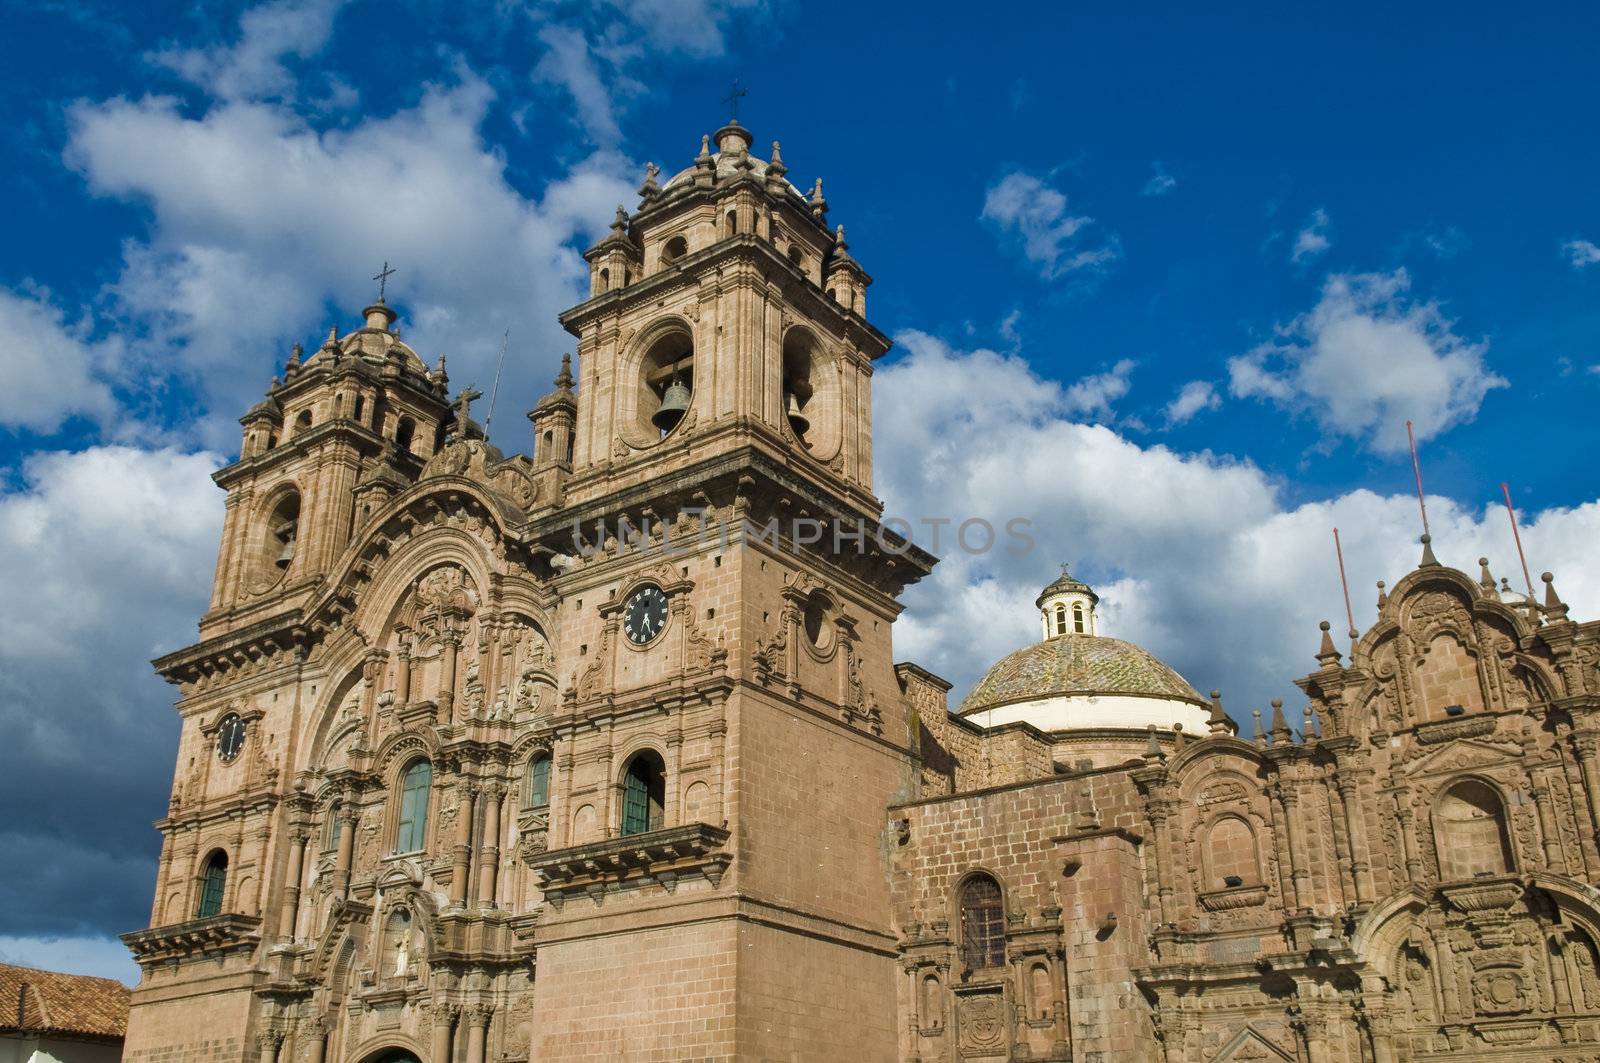 The cathadral in "Plaza de armas" in the center of Cusco Peru